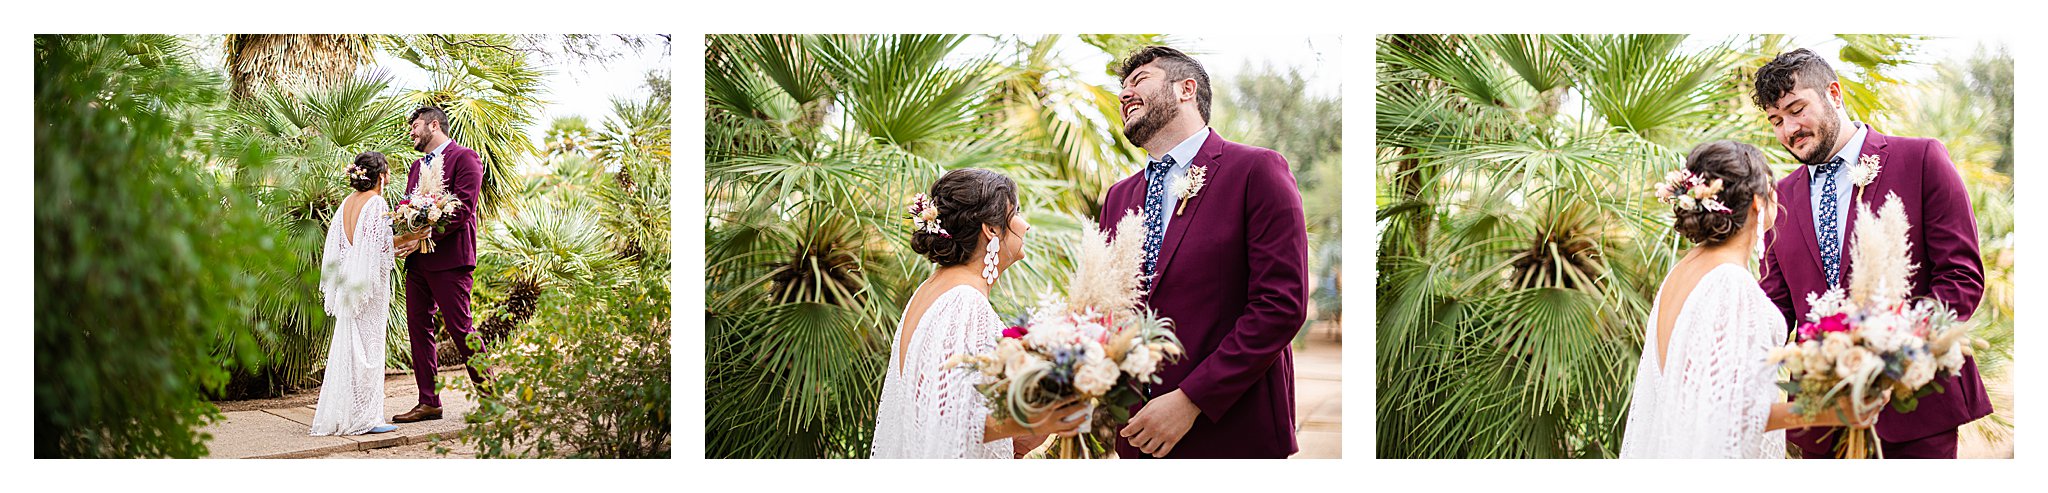 Groom gets emotional during first look